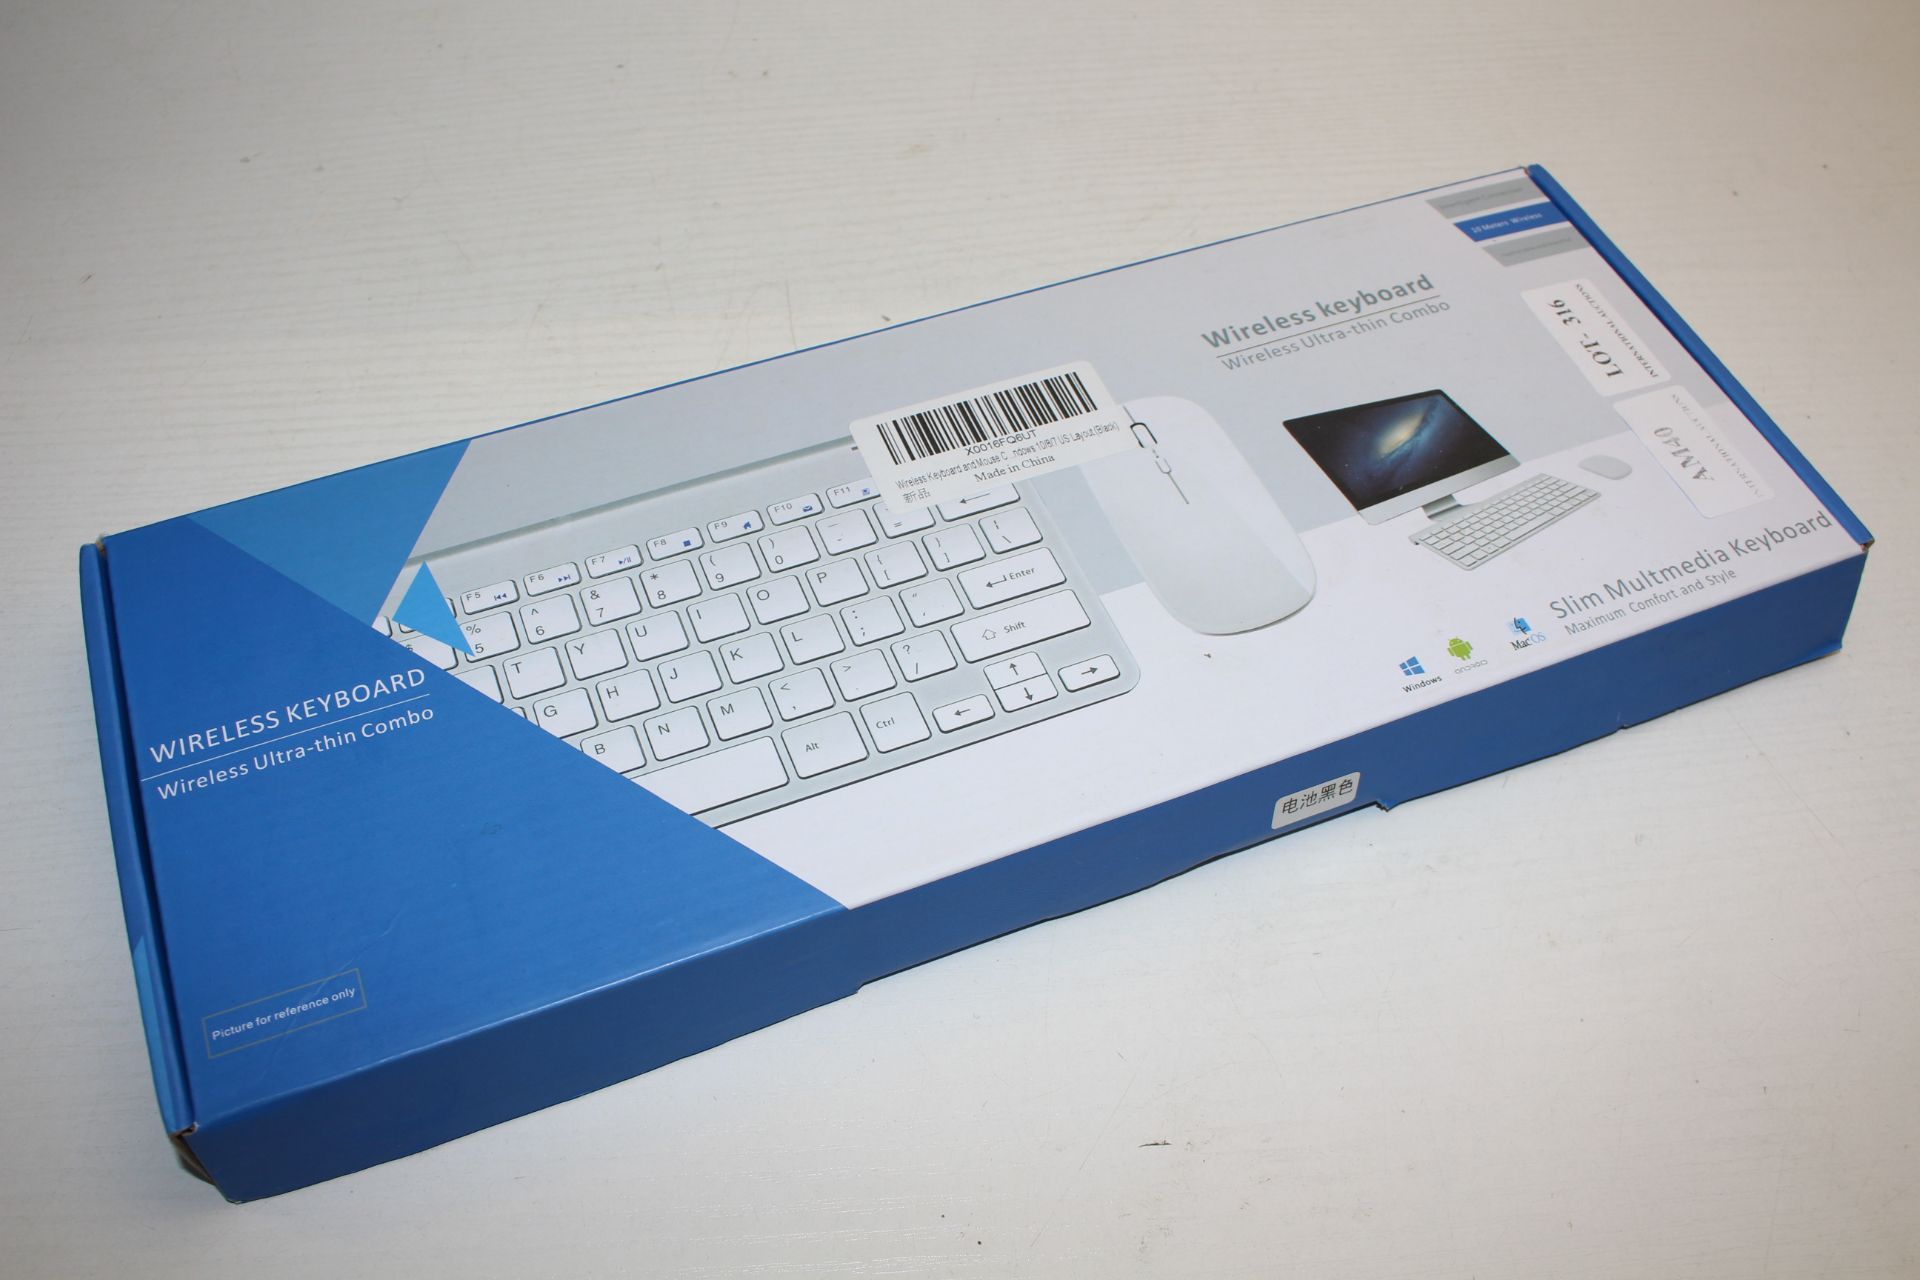 BOXED WIRELESS KEYBOARD WIRELESS ULTRA THIN COMBOCondition ReportAppraisal Available on Request- All